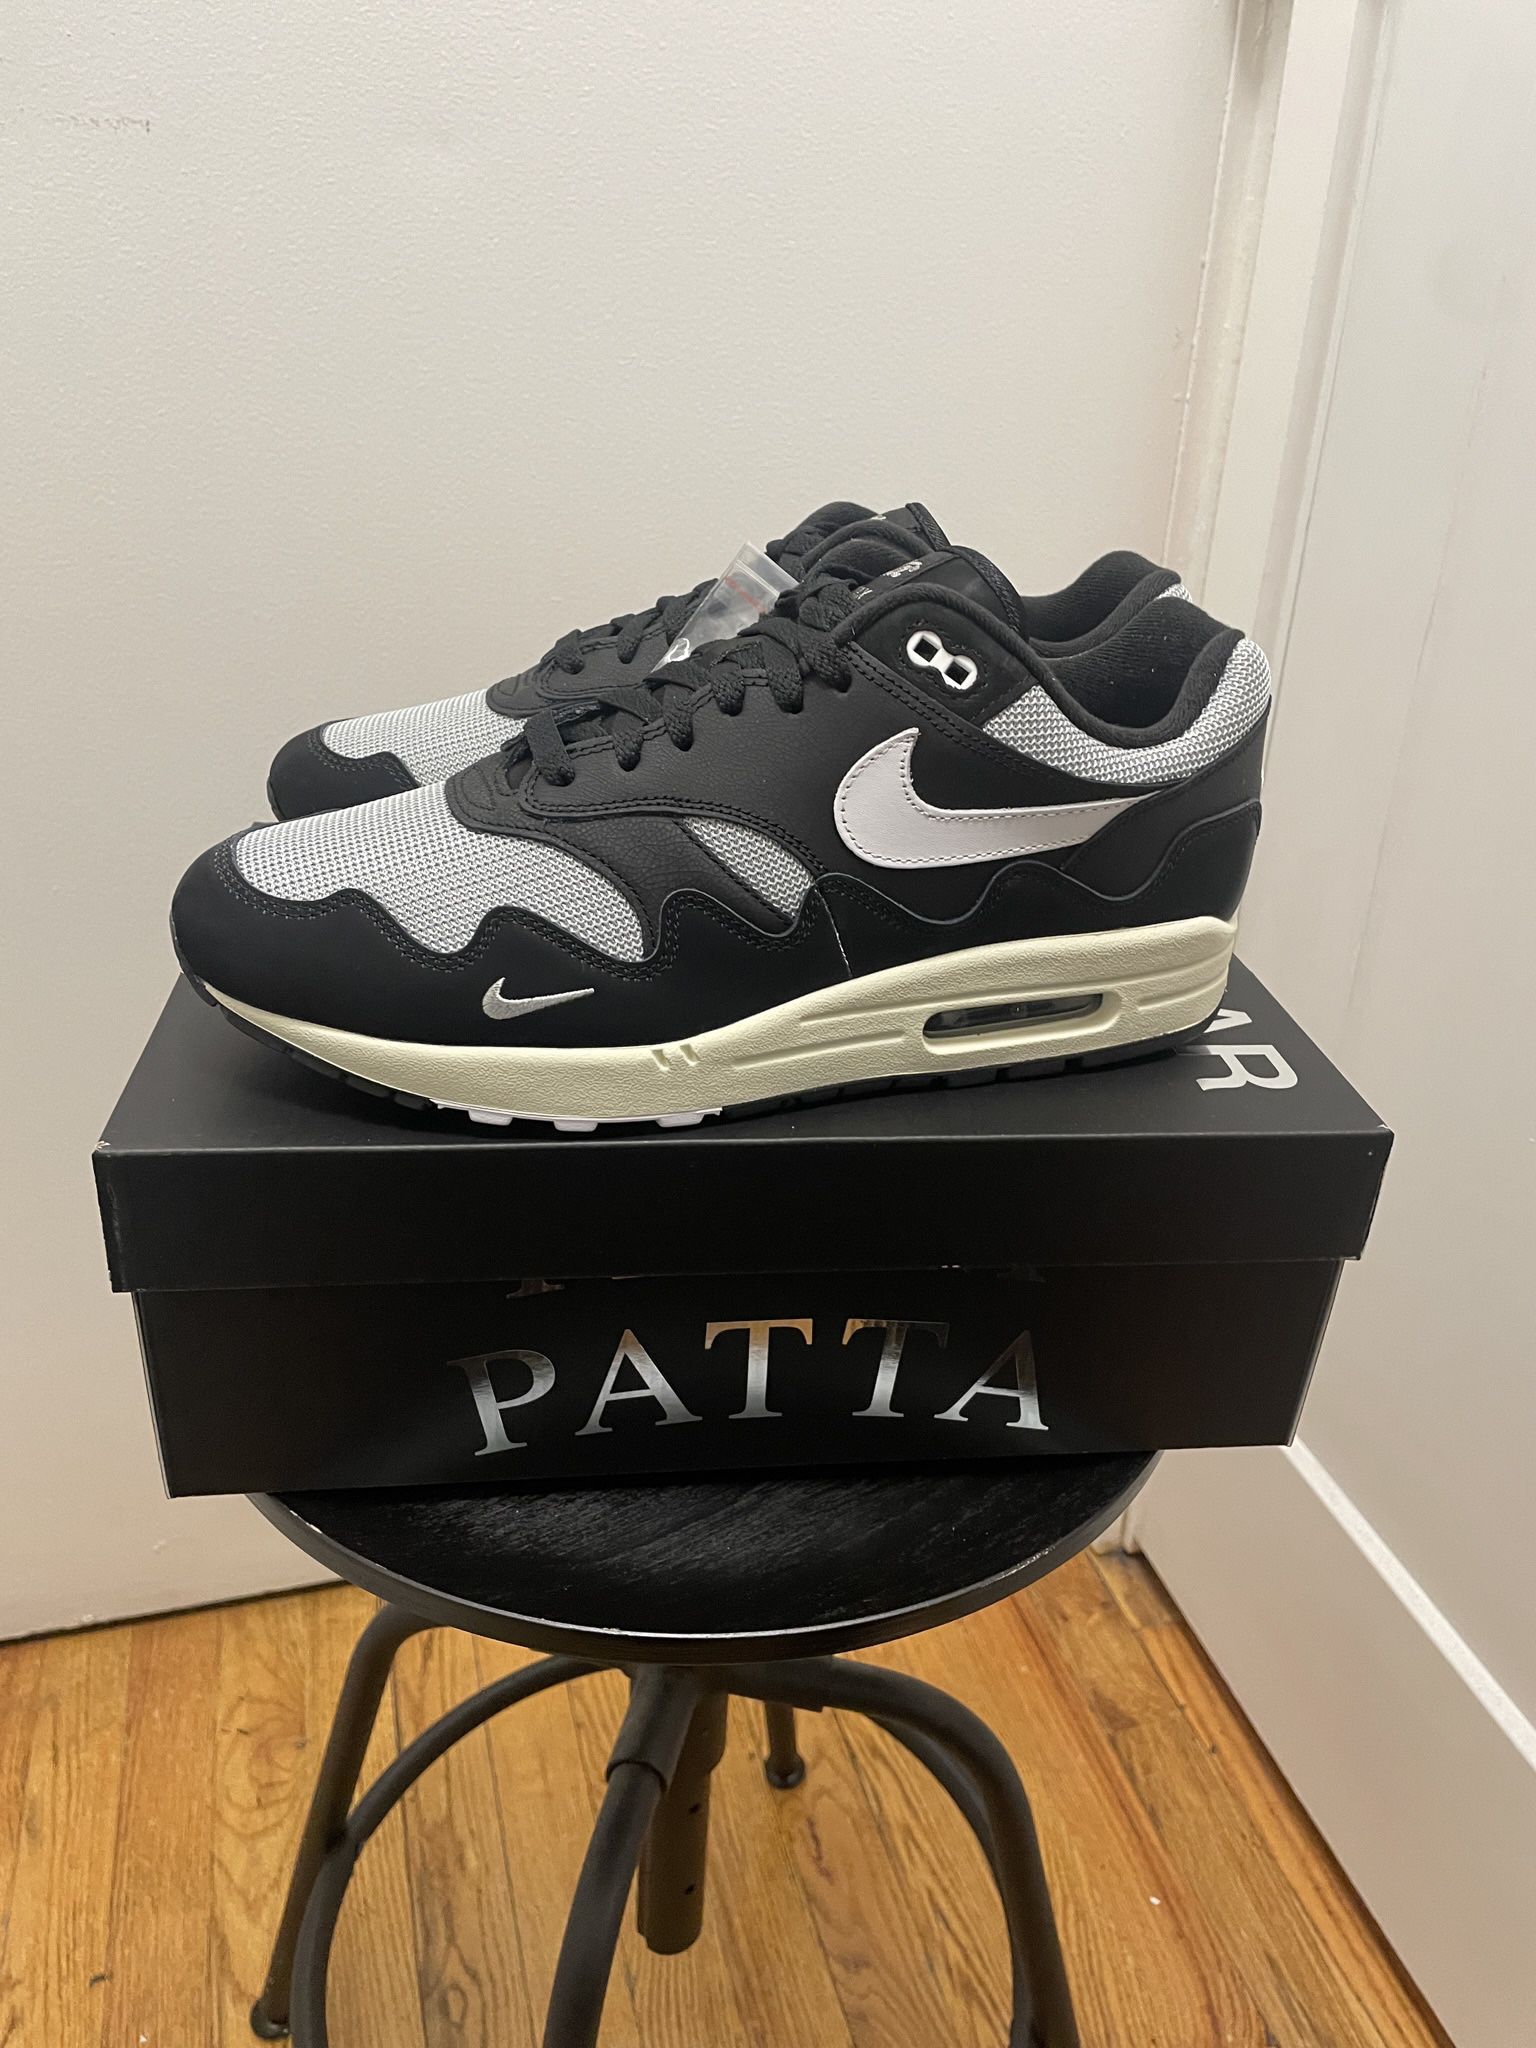 Nike Nike Air Max 1 Patta Waves Noise Aqua  Size 5 Available For Immediate  Sale At Sotheby's